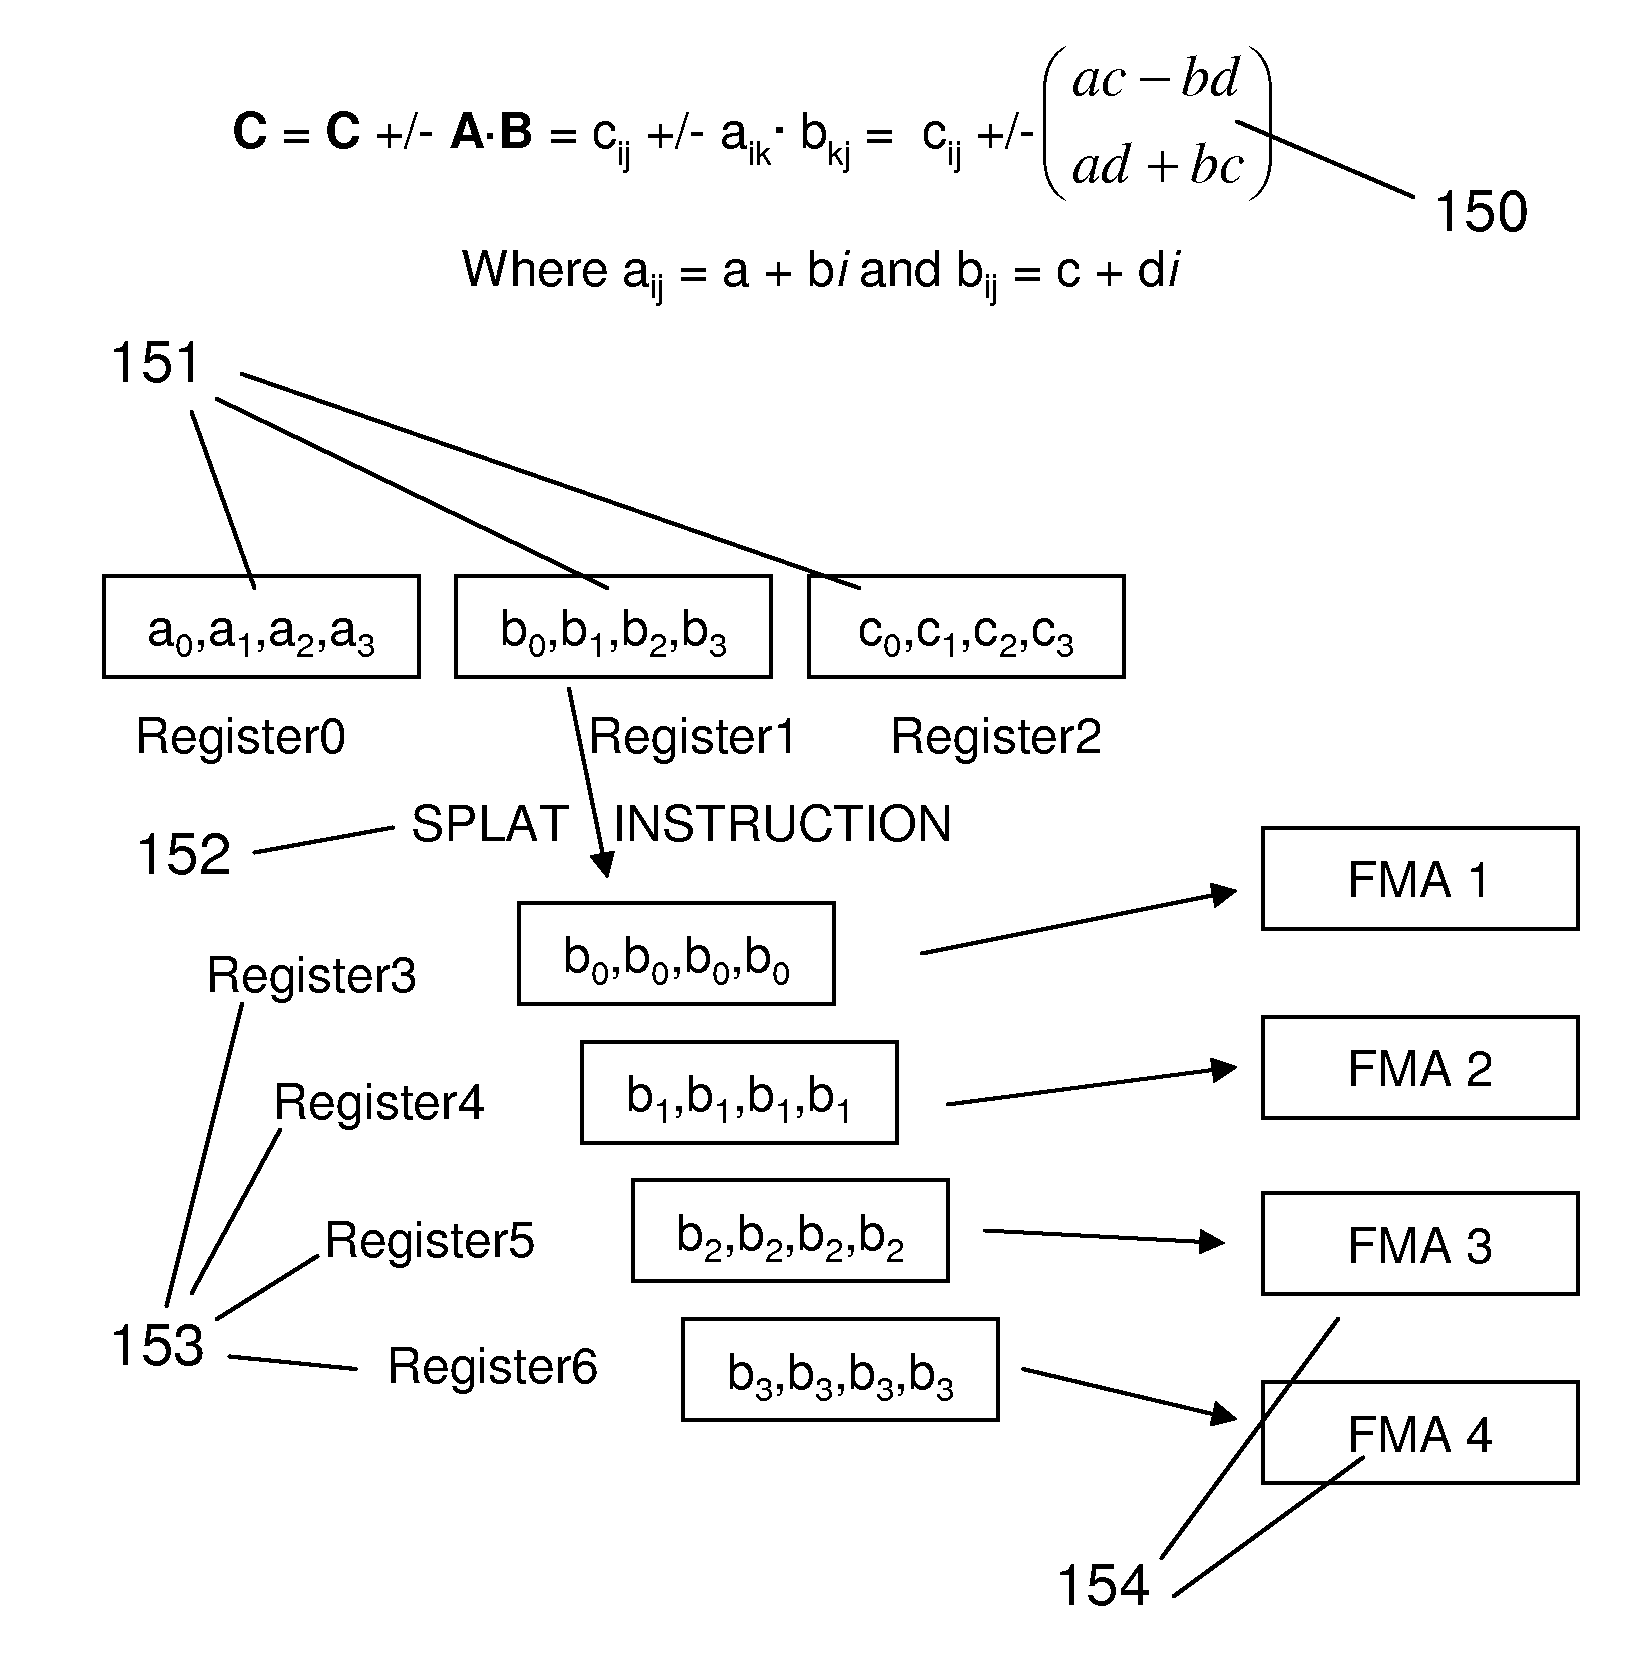 Method and structure of using SIMD vector architectures to implement matrix multiplication